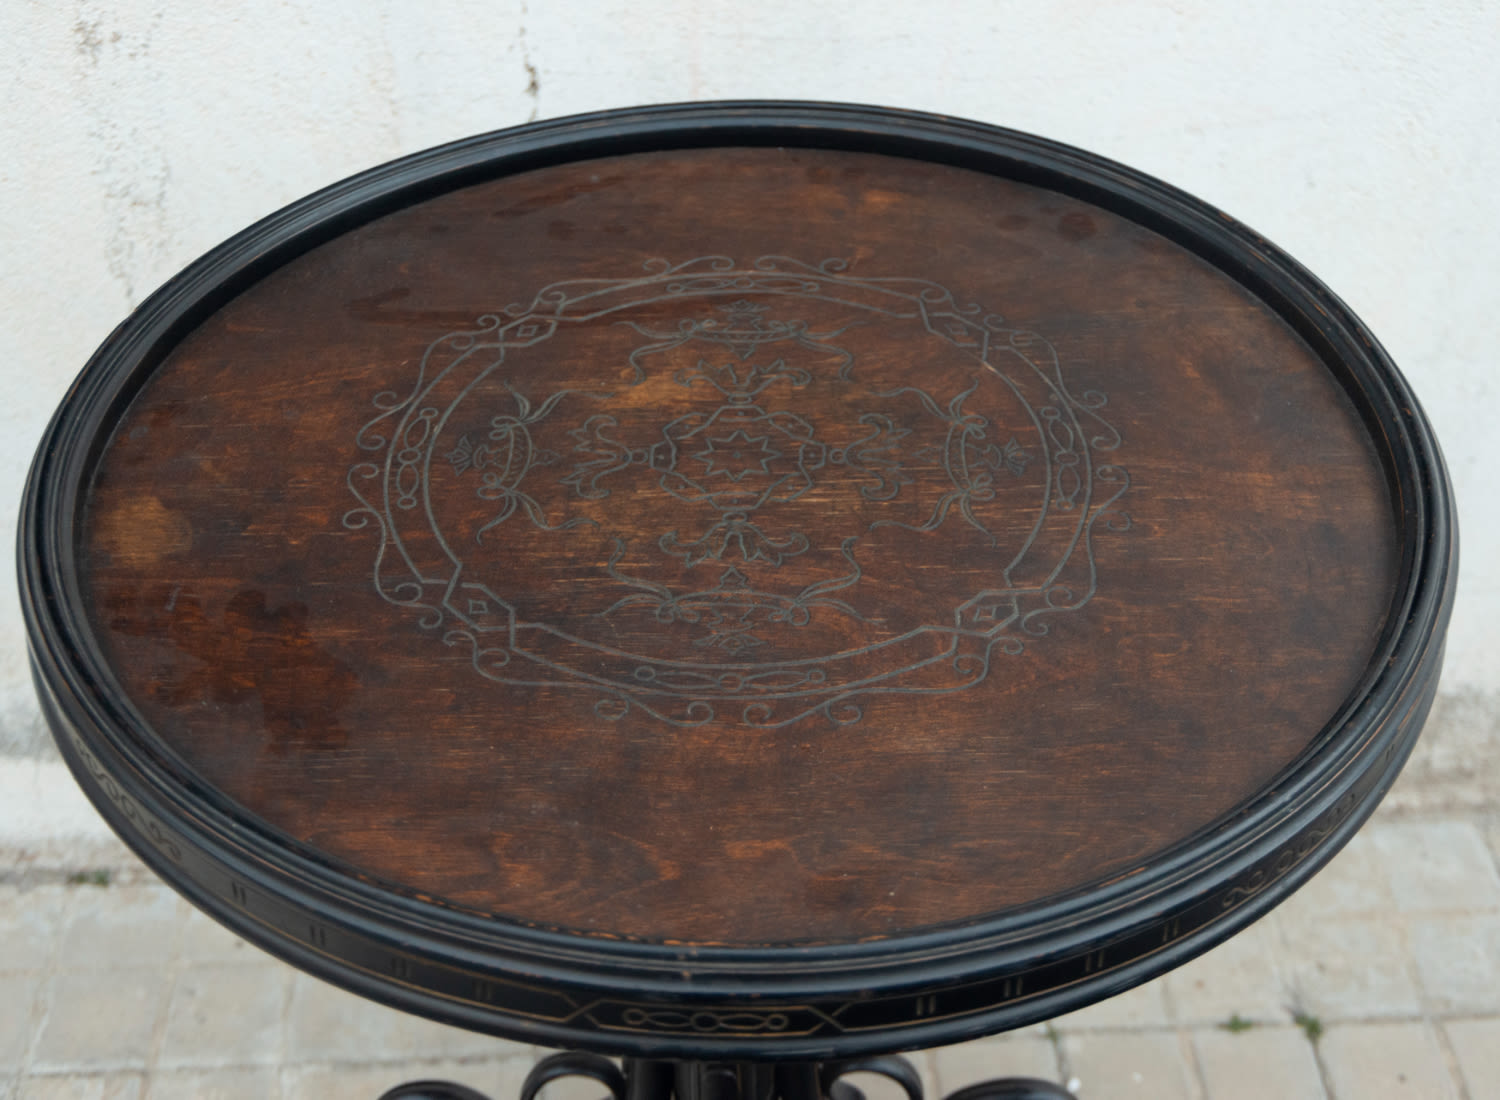 Art Nouveau table in ebonized wood, late 19th century - Image 2 of 4